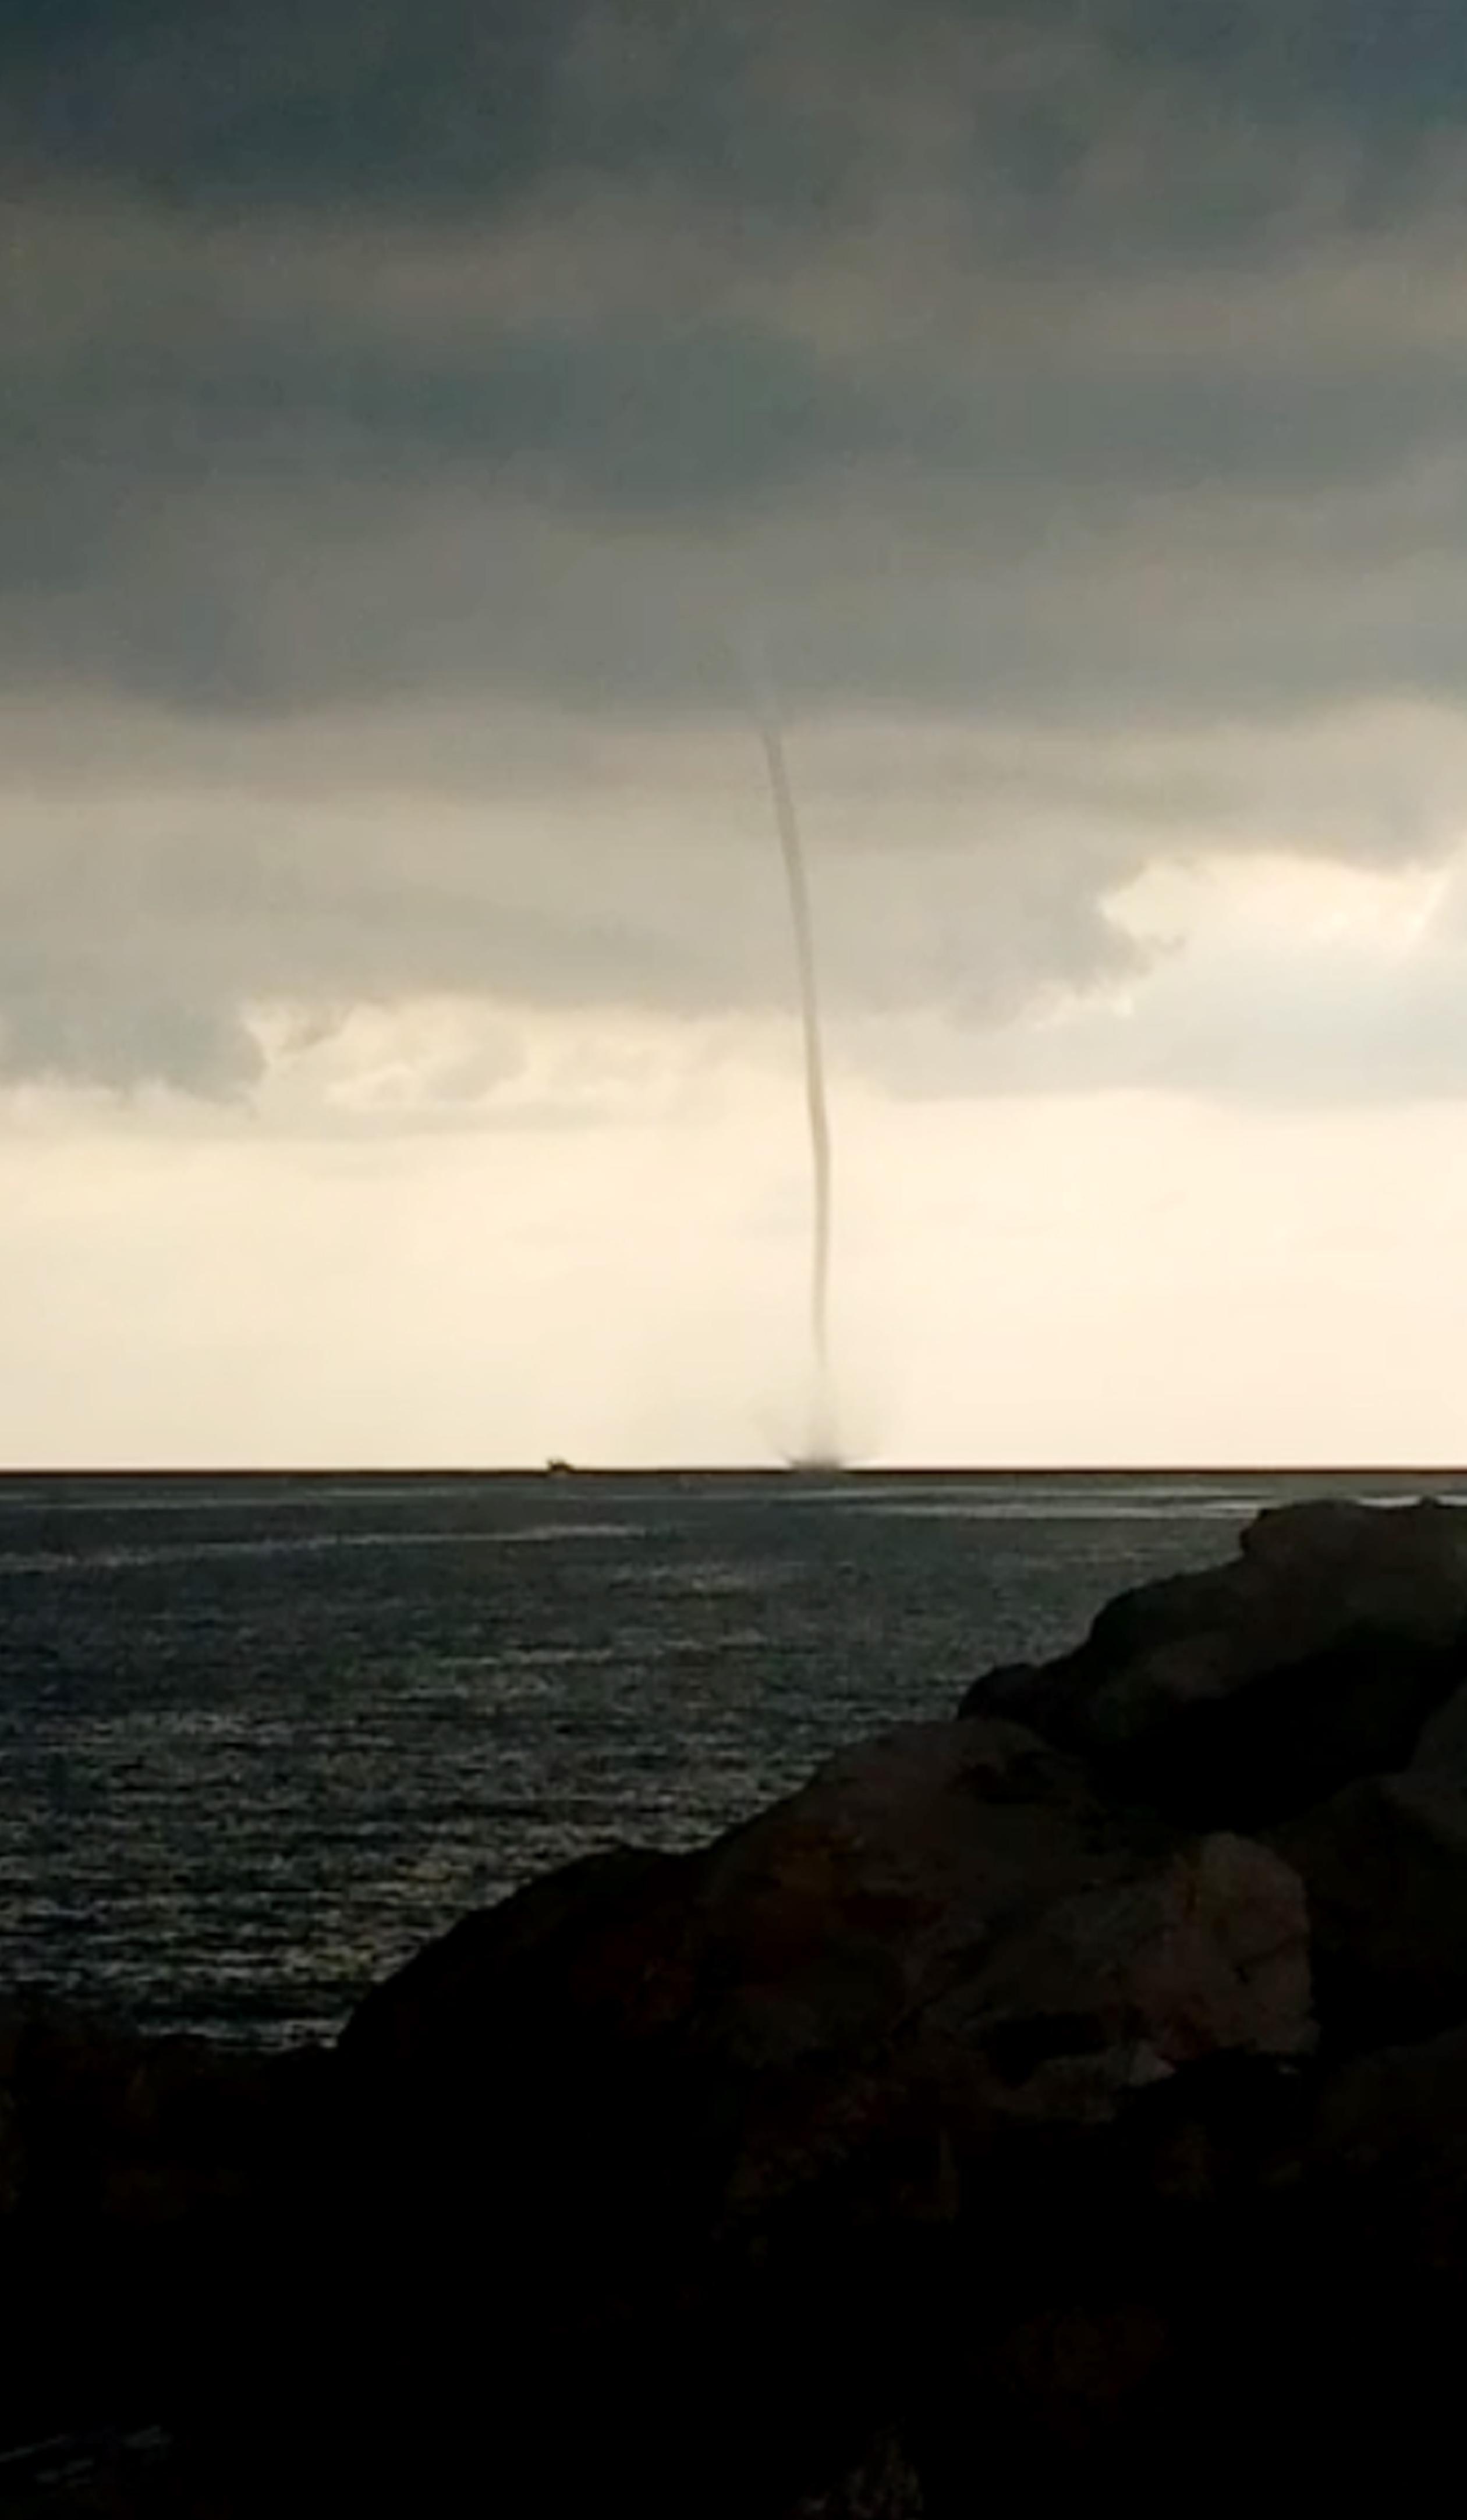 Two tornadoes occurred in the sea in Antalya